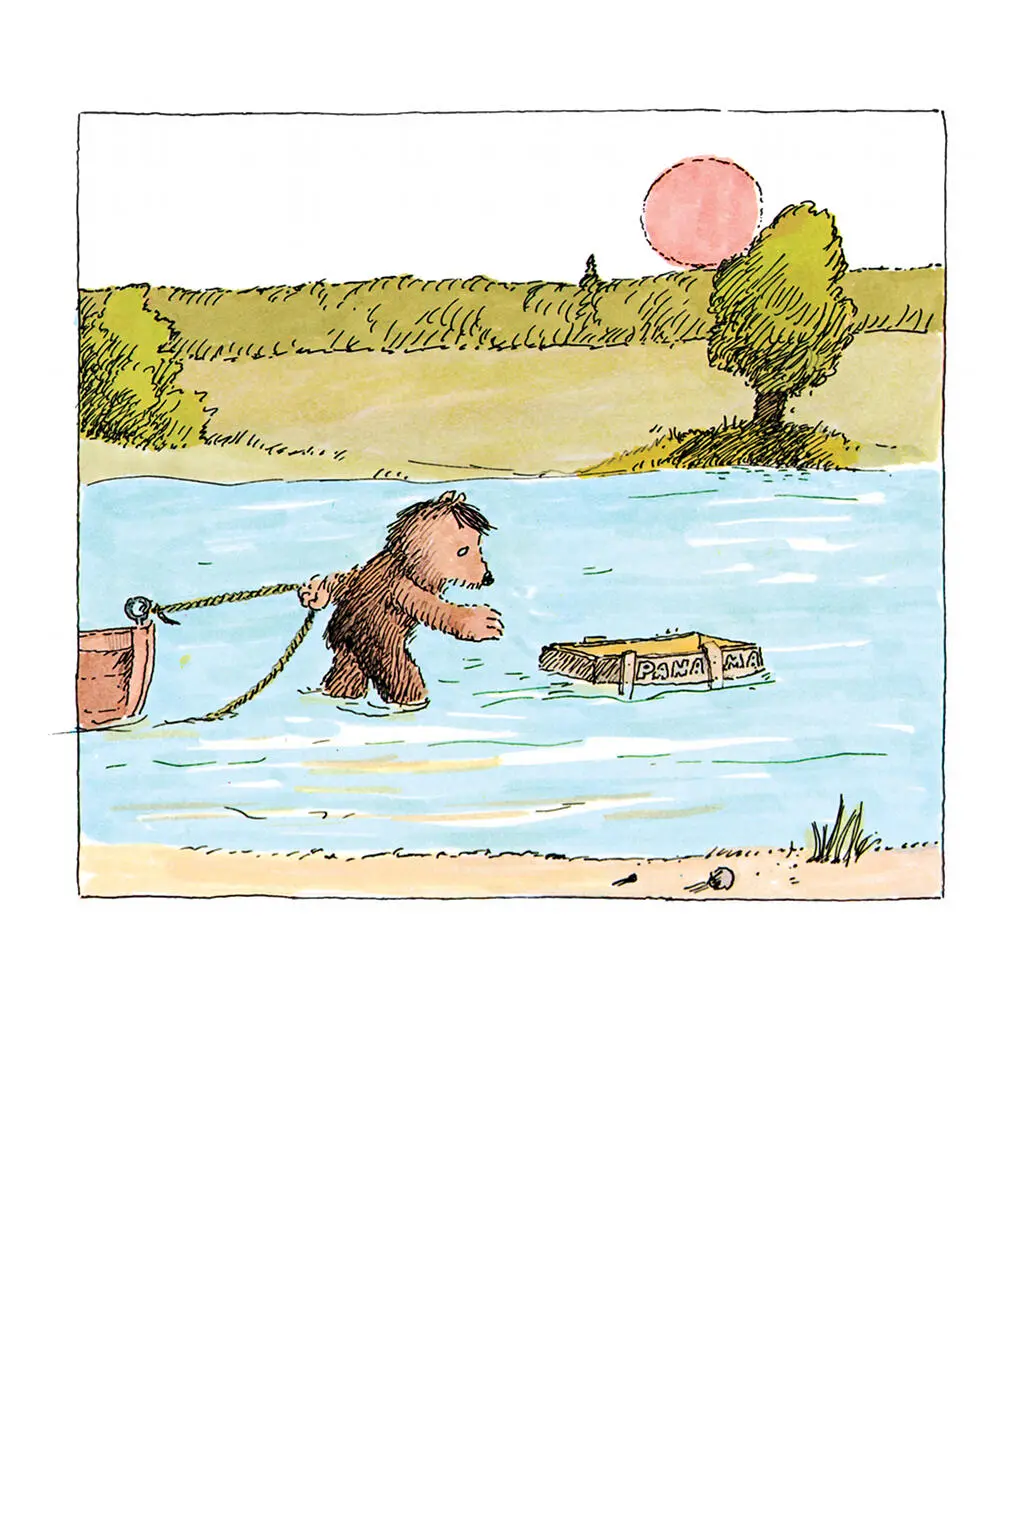 a crate came floating down the river Little Bear fished it out of the water - фото 11